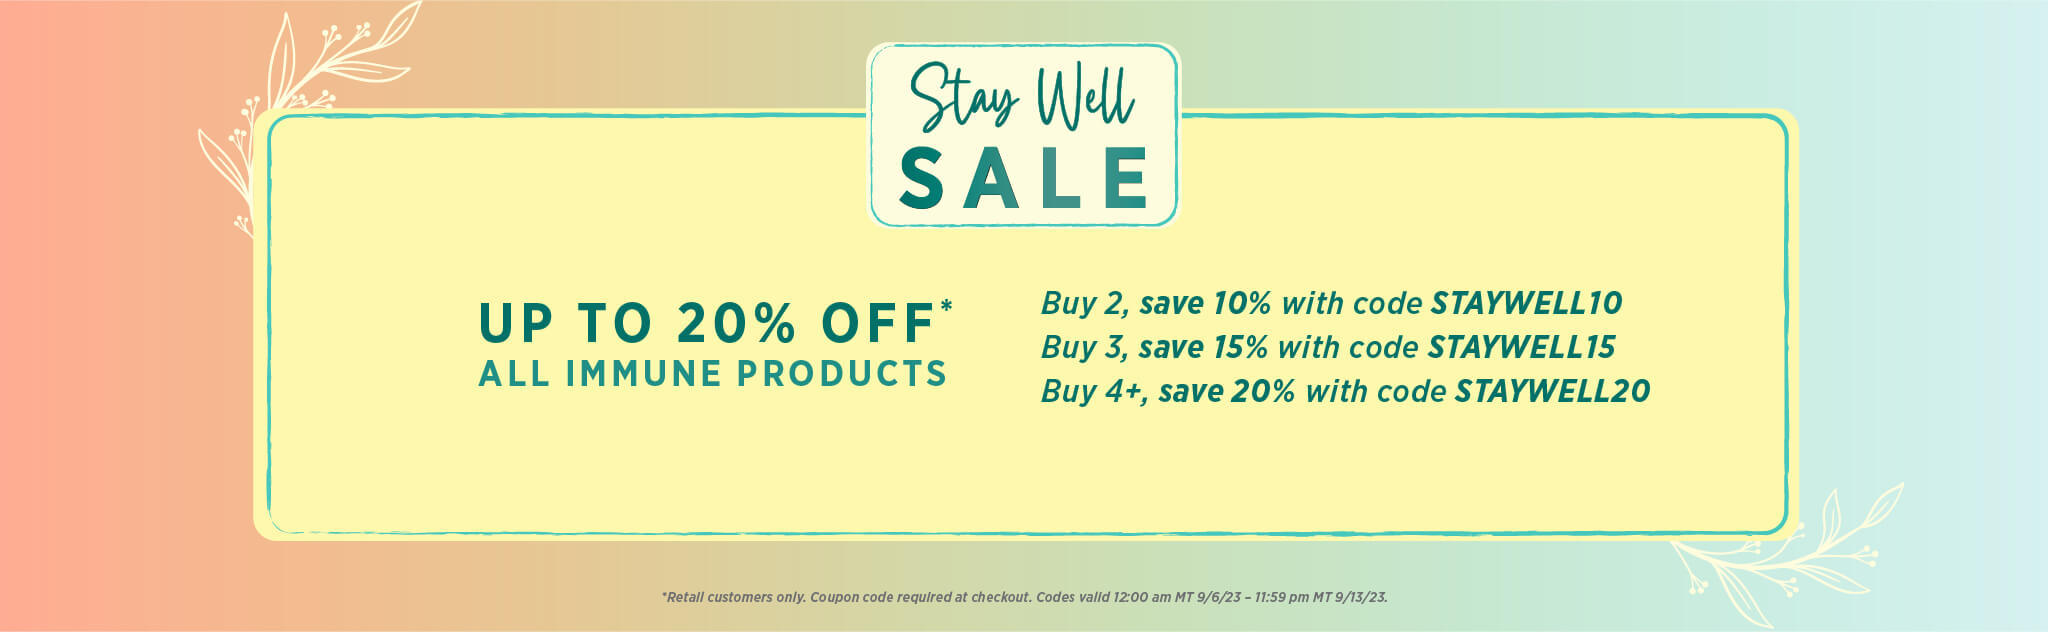 Stay Well Sale, up to 20% off all immune products: Buy 2, save 10% with code STAYWELL10, buy 3, save 15% with code STAYWELL15, buy 4+, save 20% with code STAYWELL20